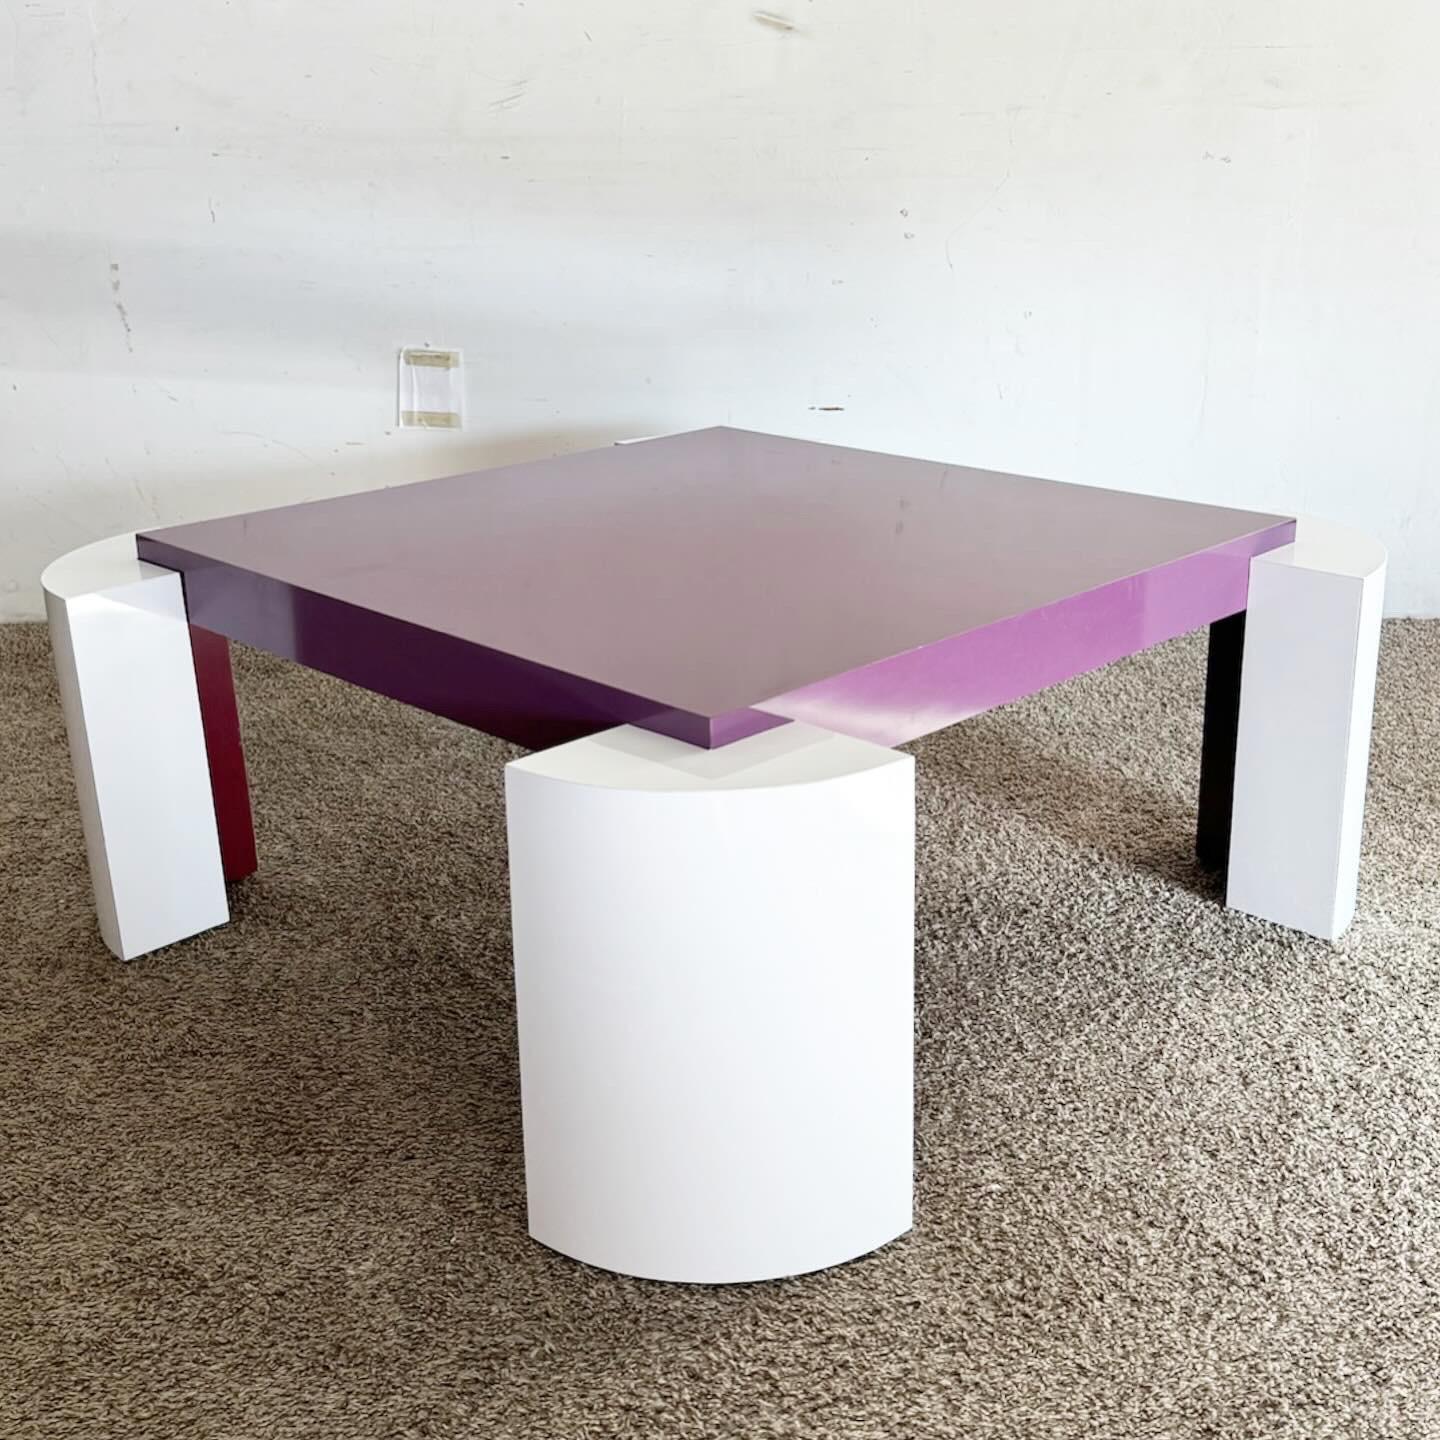 The Postmodern Purple and White Lacquer Laminate Coffee Table is a bold addition to any living space. This table showcases a high-gloss laminate finish in purple and white, offering a striking contrast. Durable and easy to clean, its rectangular